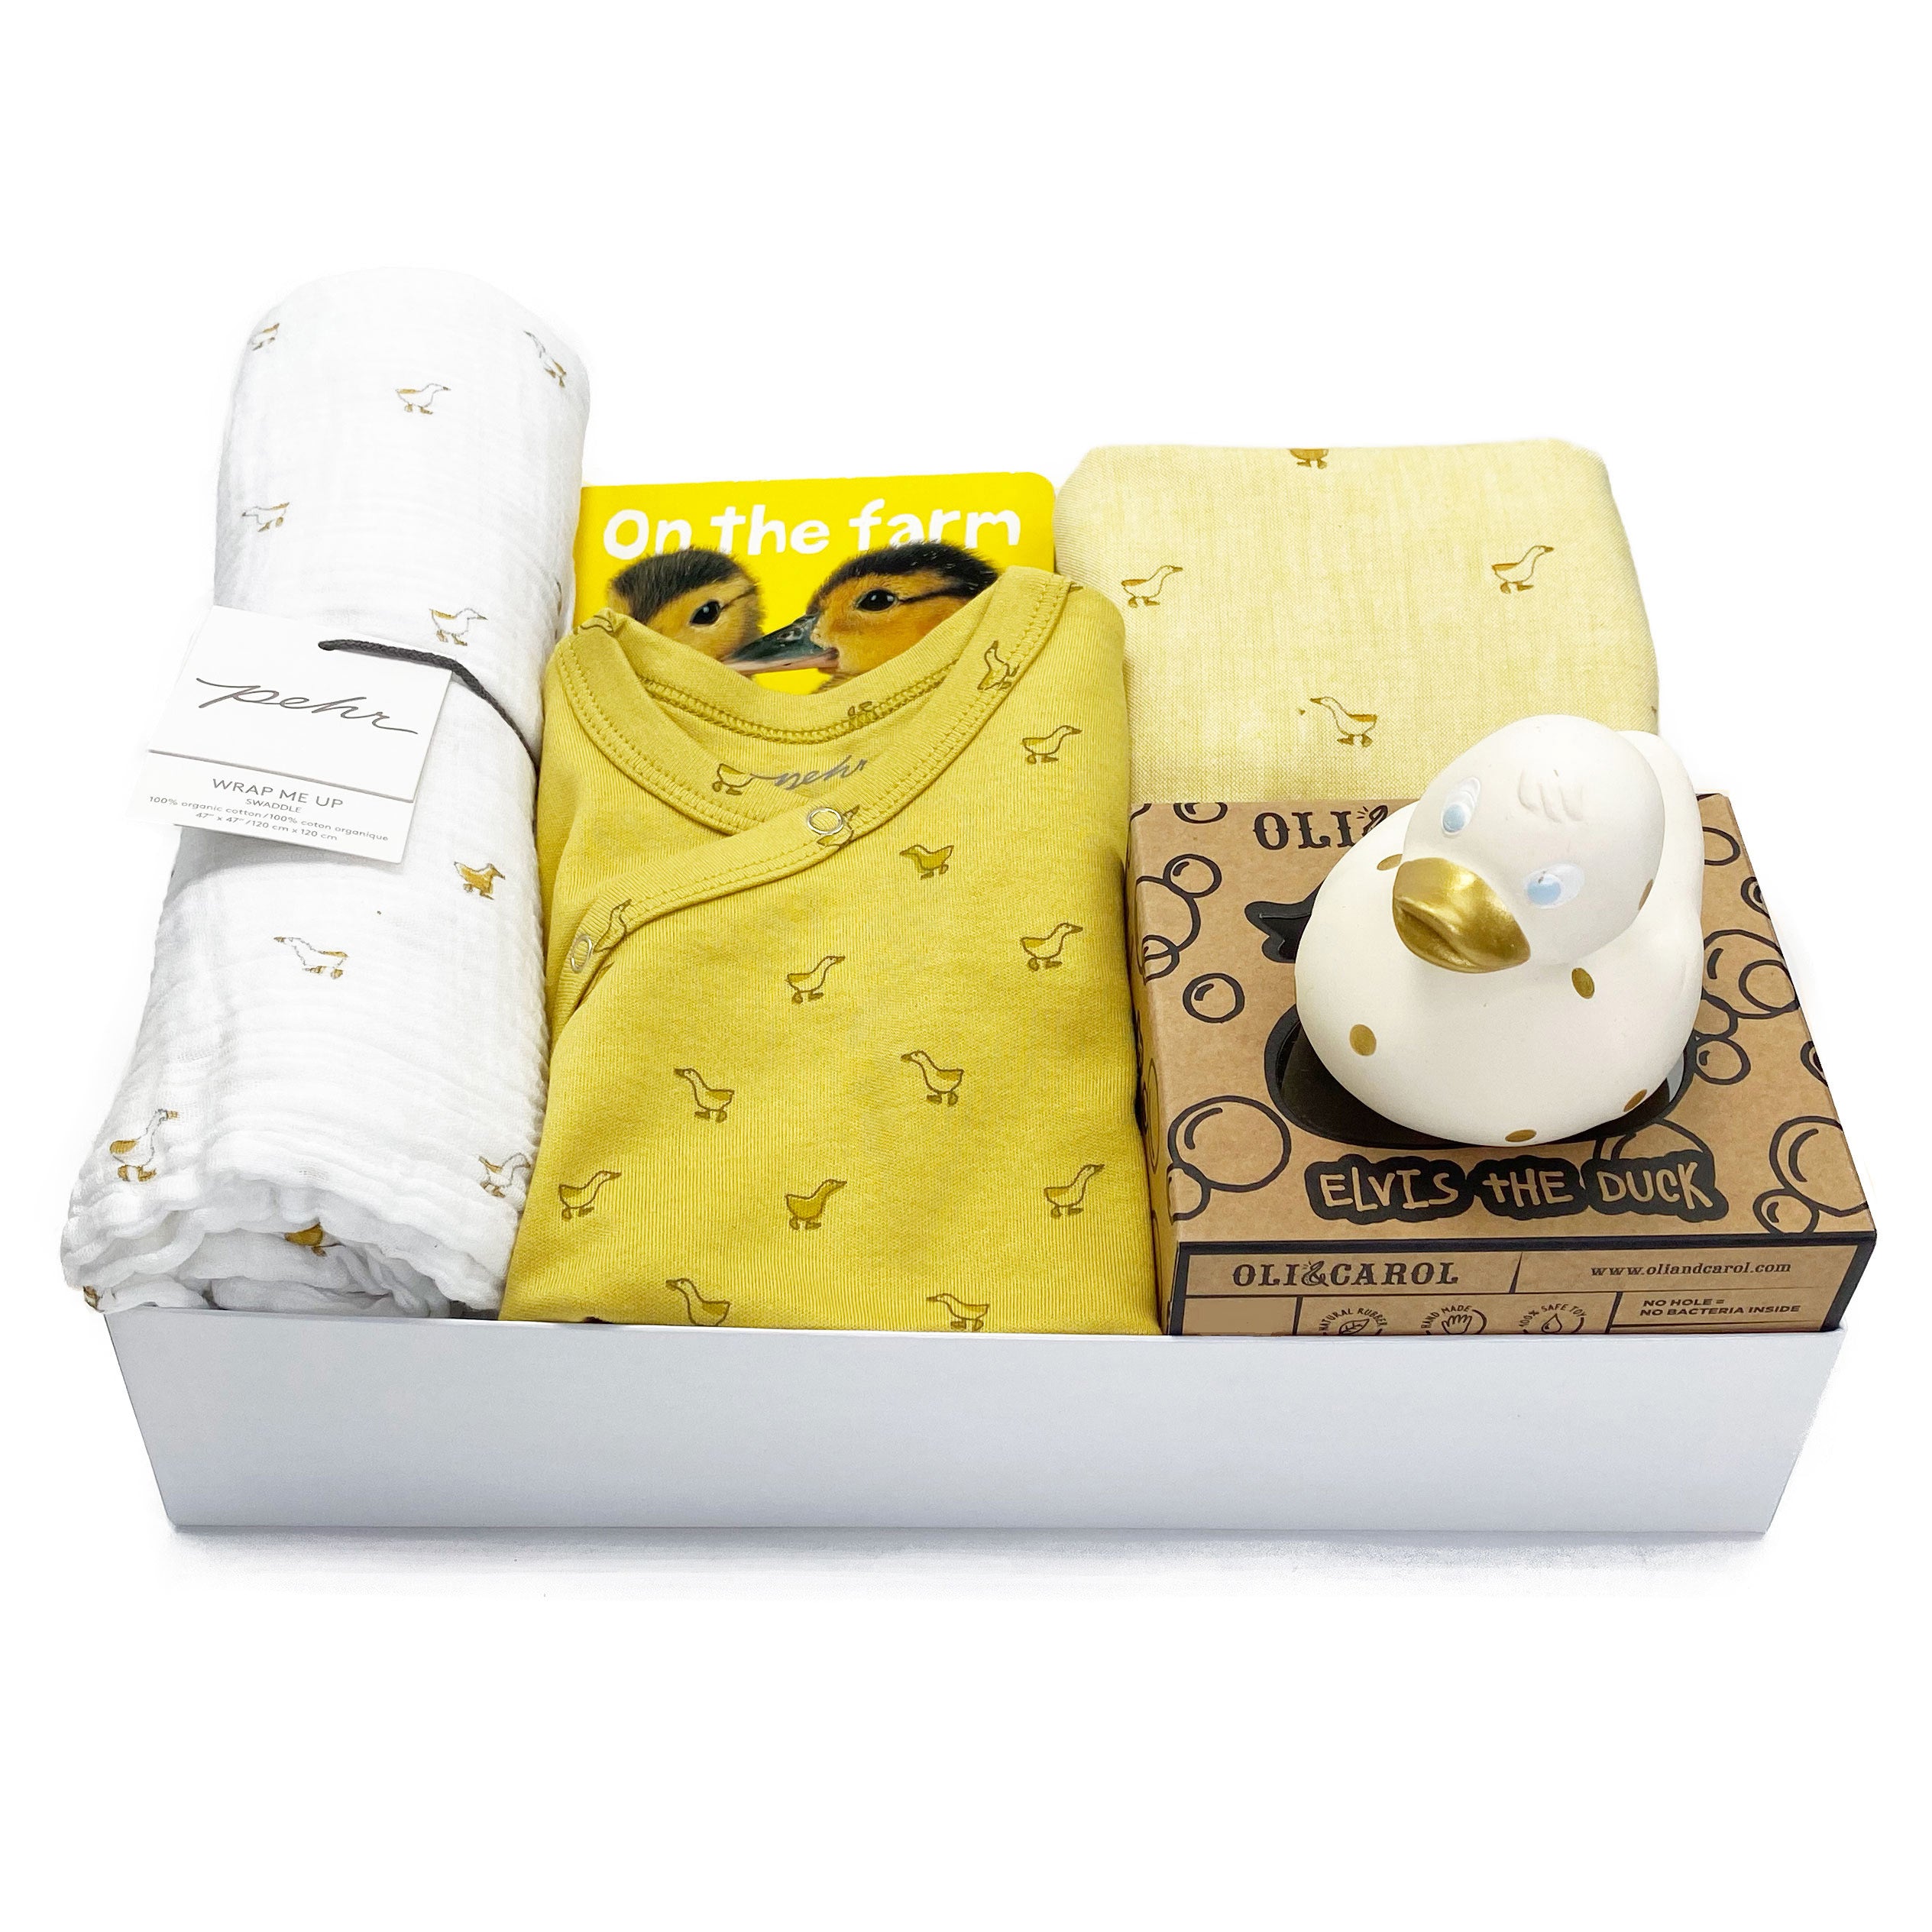 Hatchlings Baby Gift Box at Bonjour Baby Baskets - Luxury Baby Gifts